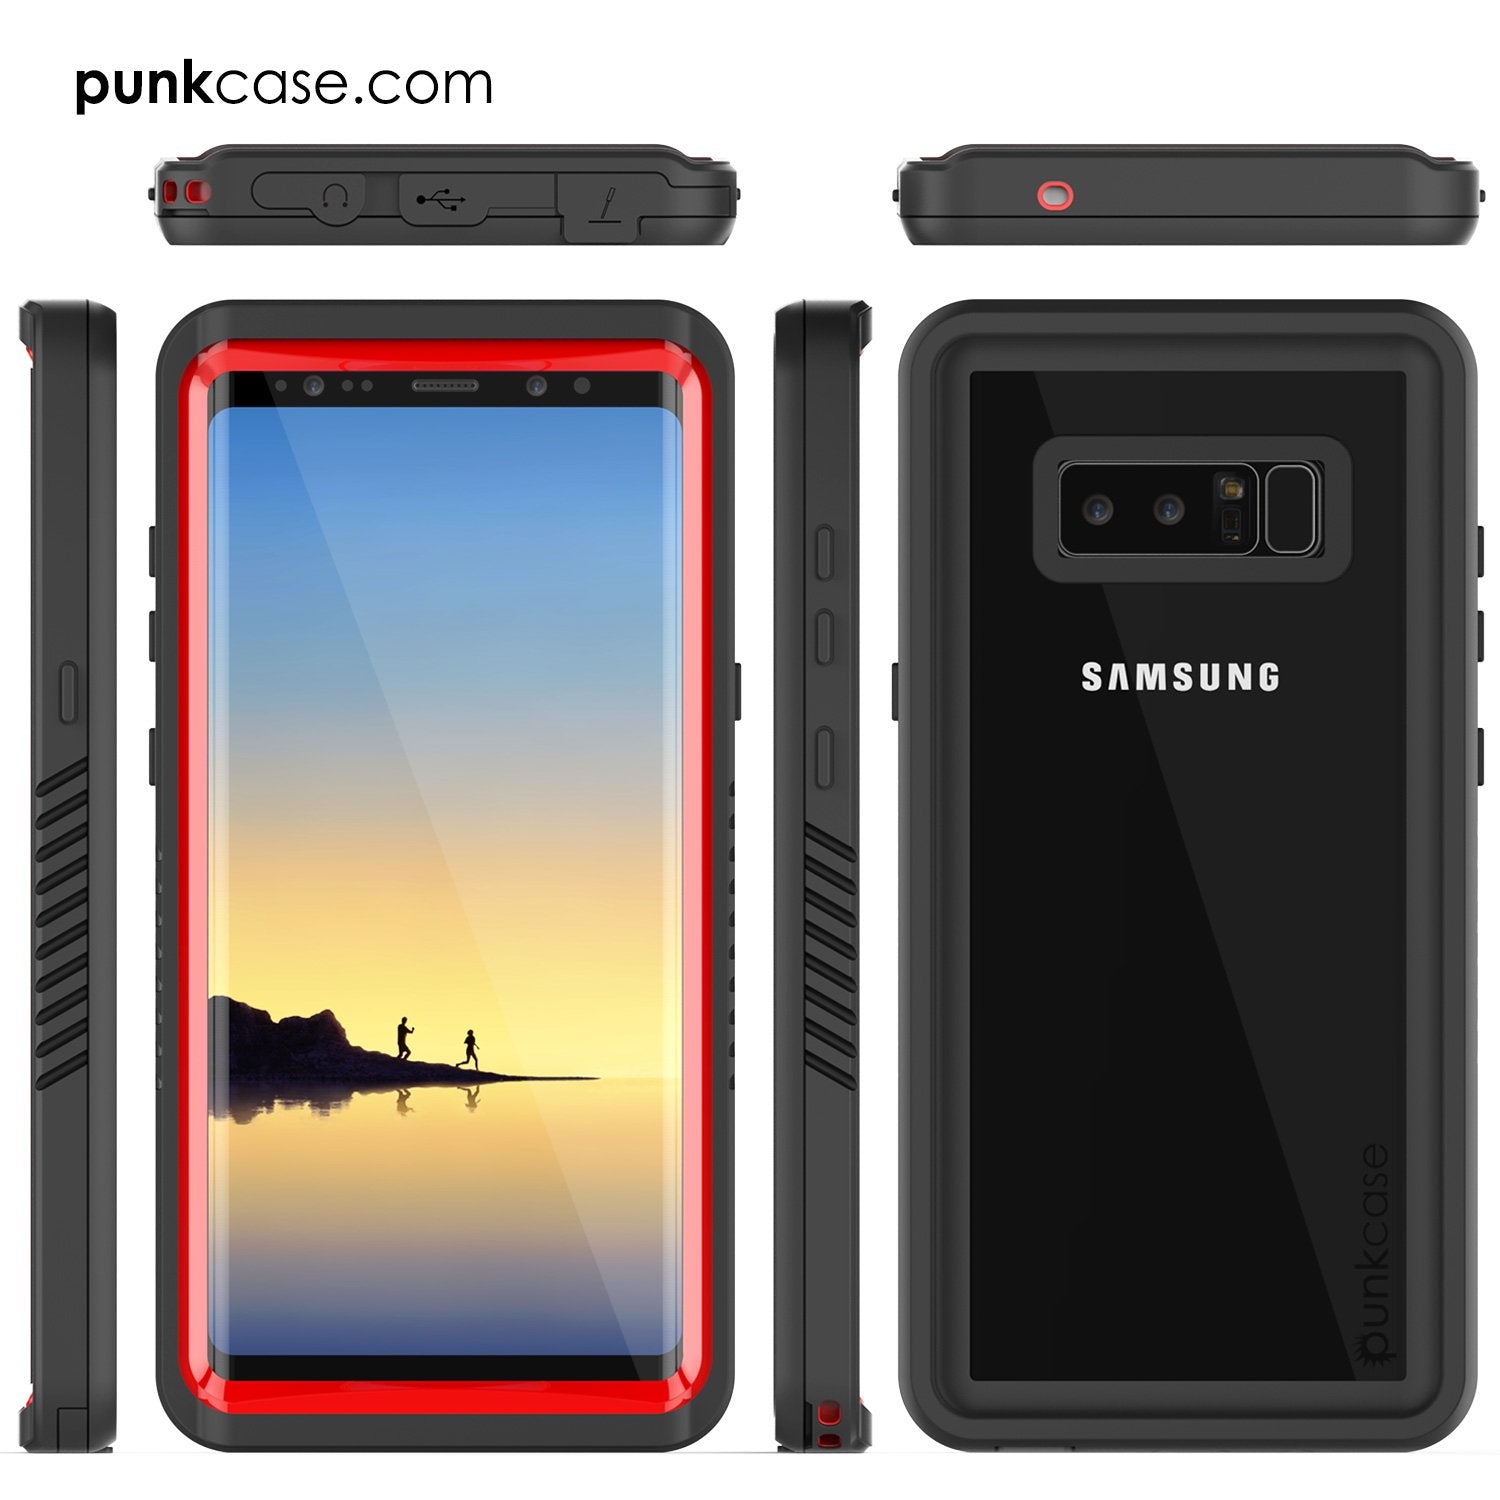 Galaxy Note 8 Case, Punkcase [Extreme Series] [Slim Fit] [IP68 Certified] [Shockproof] Armor Cover W/ Built In Screen Protector [Red]